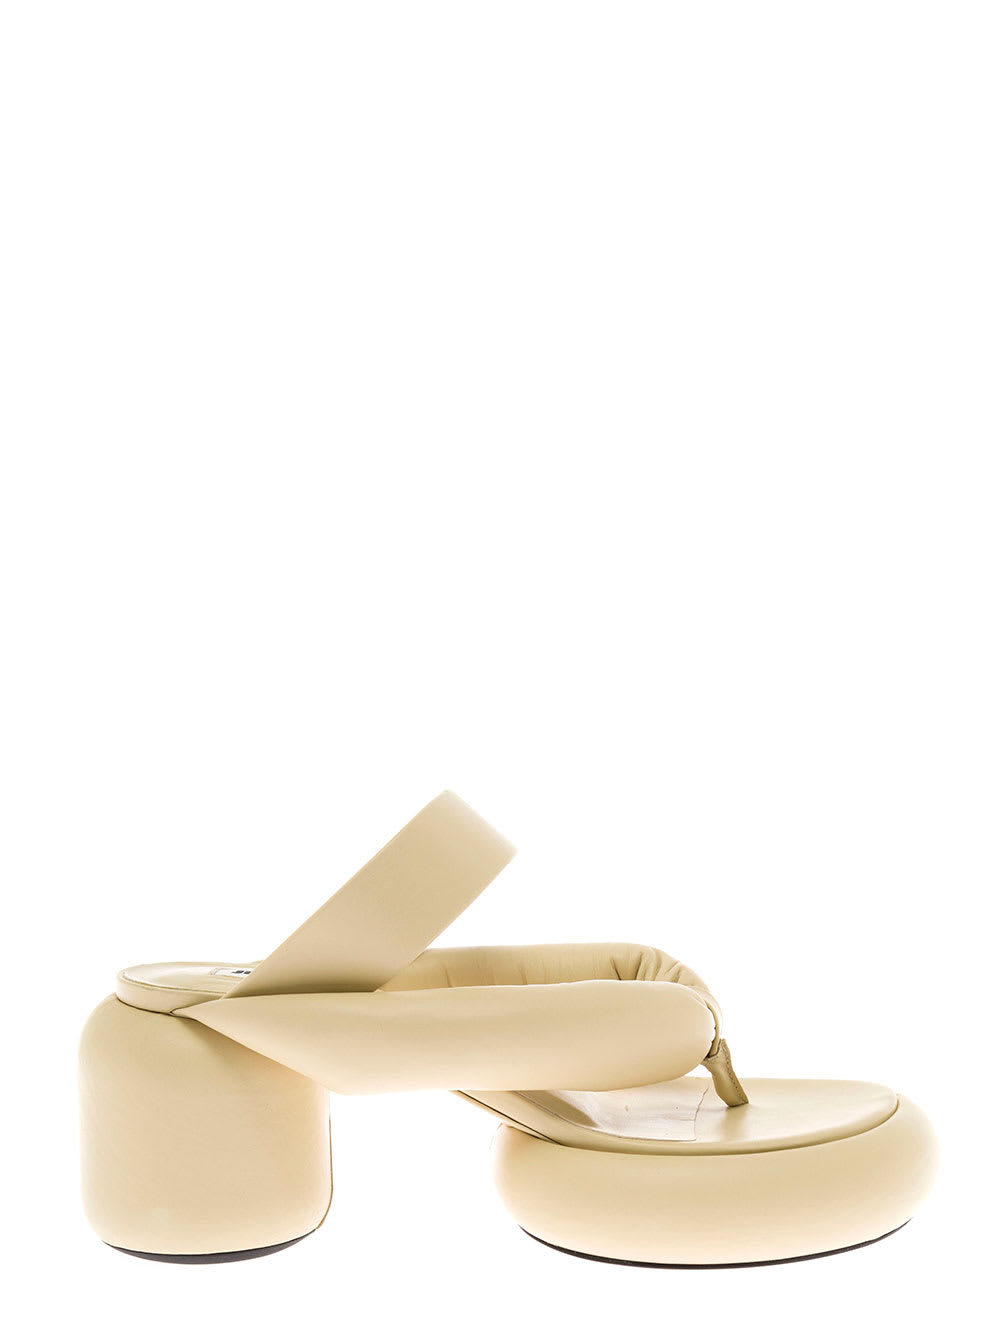 Jil Sander Womans Sculpture Ivory Colored Leather Thong Sandals